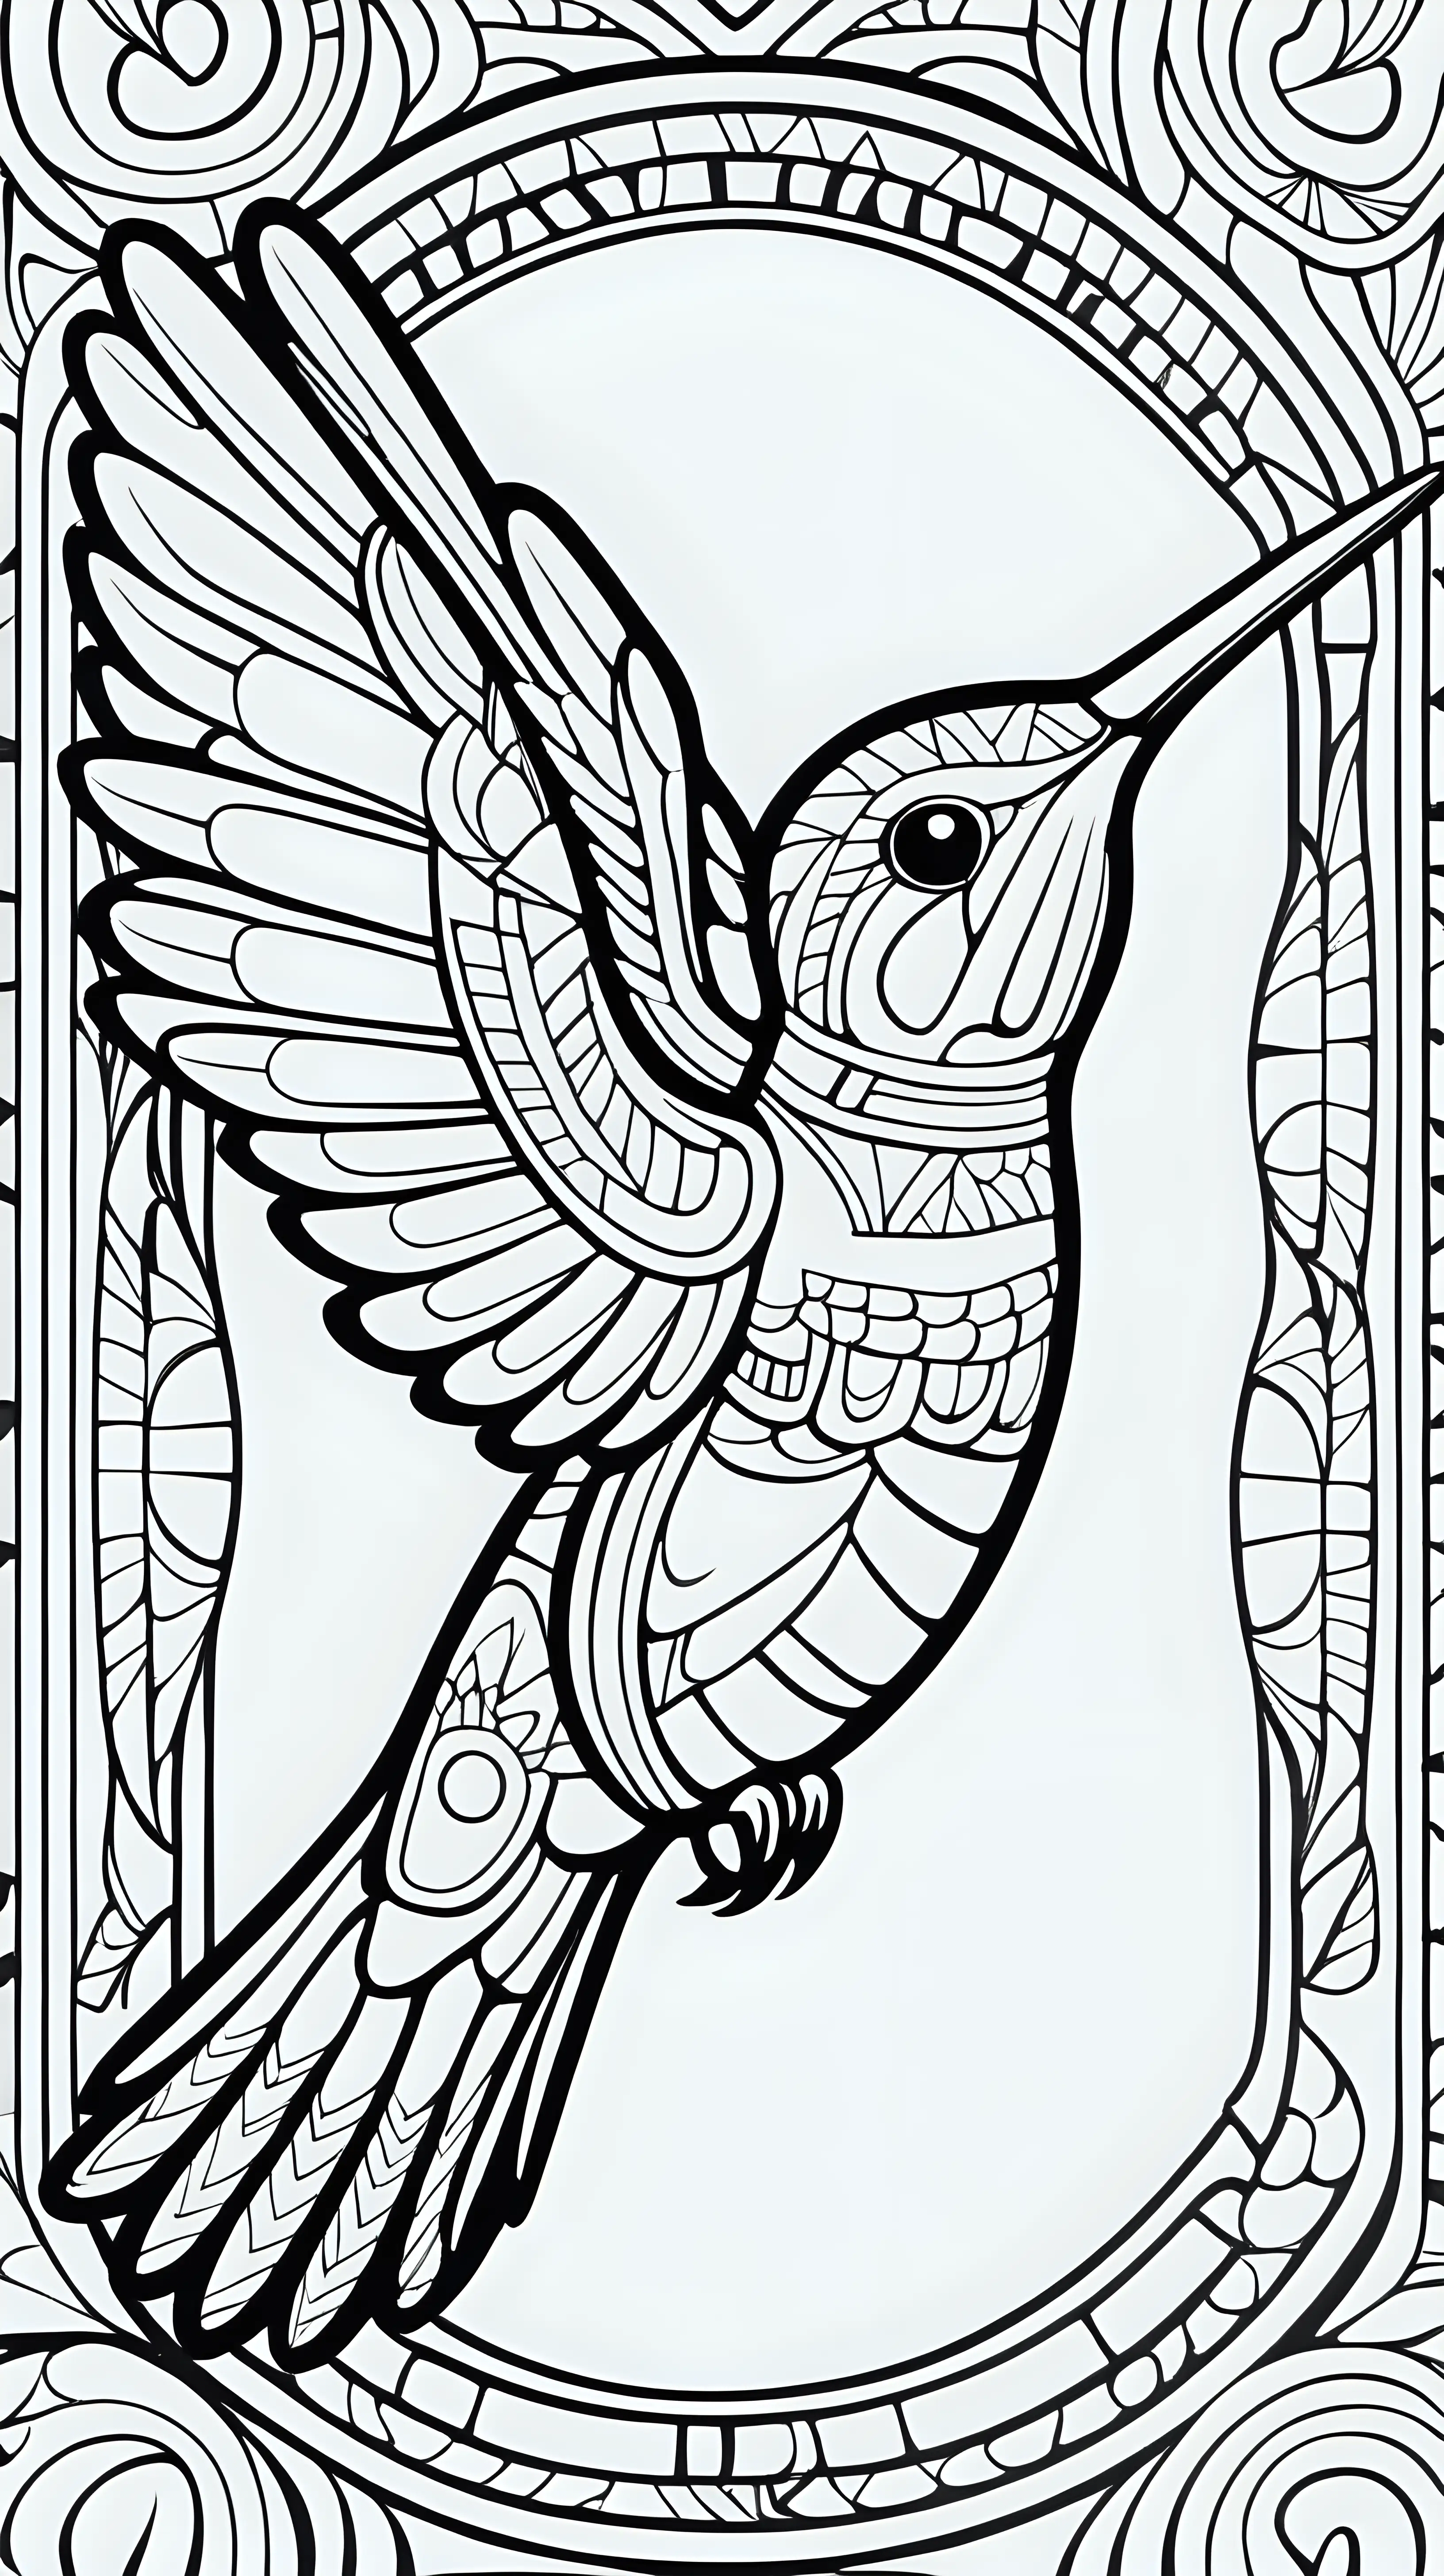 Hopi Inspired Hummingbird Totem Coloring Page for Joy and Healing